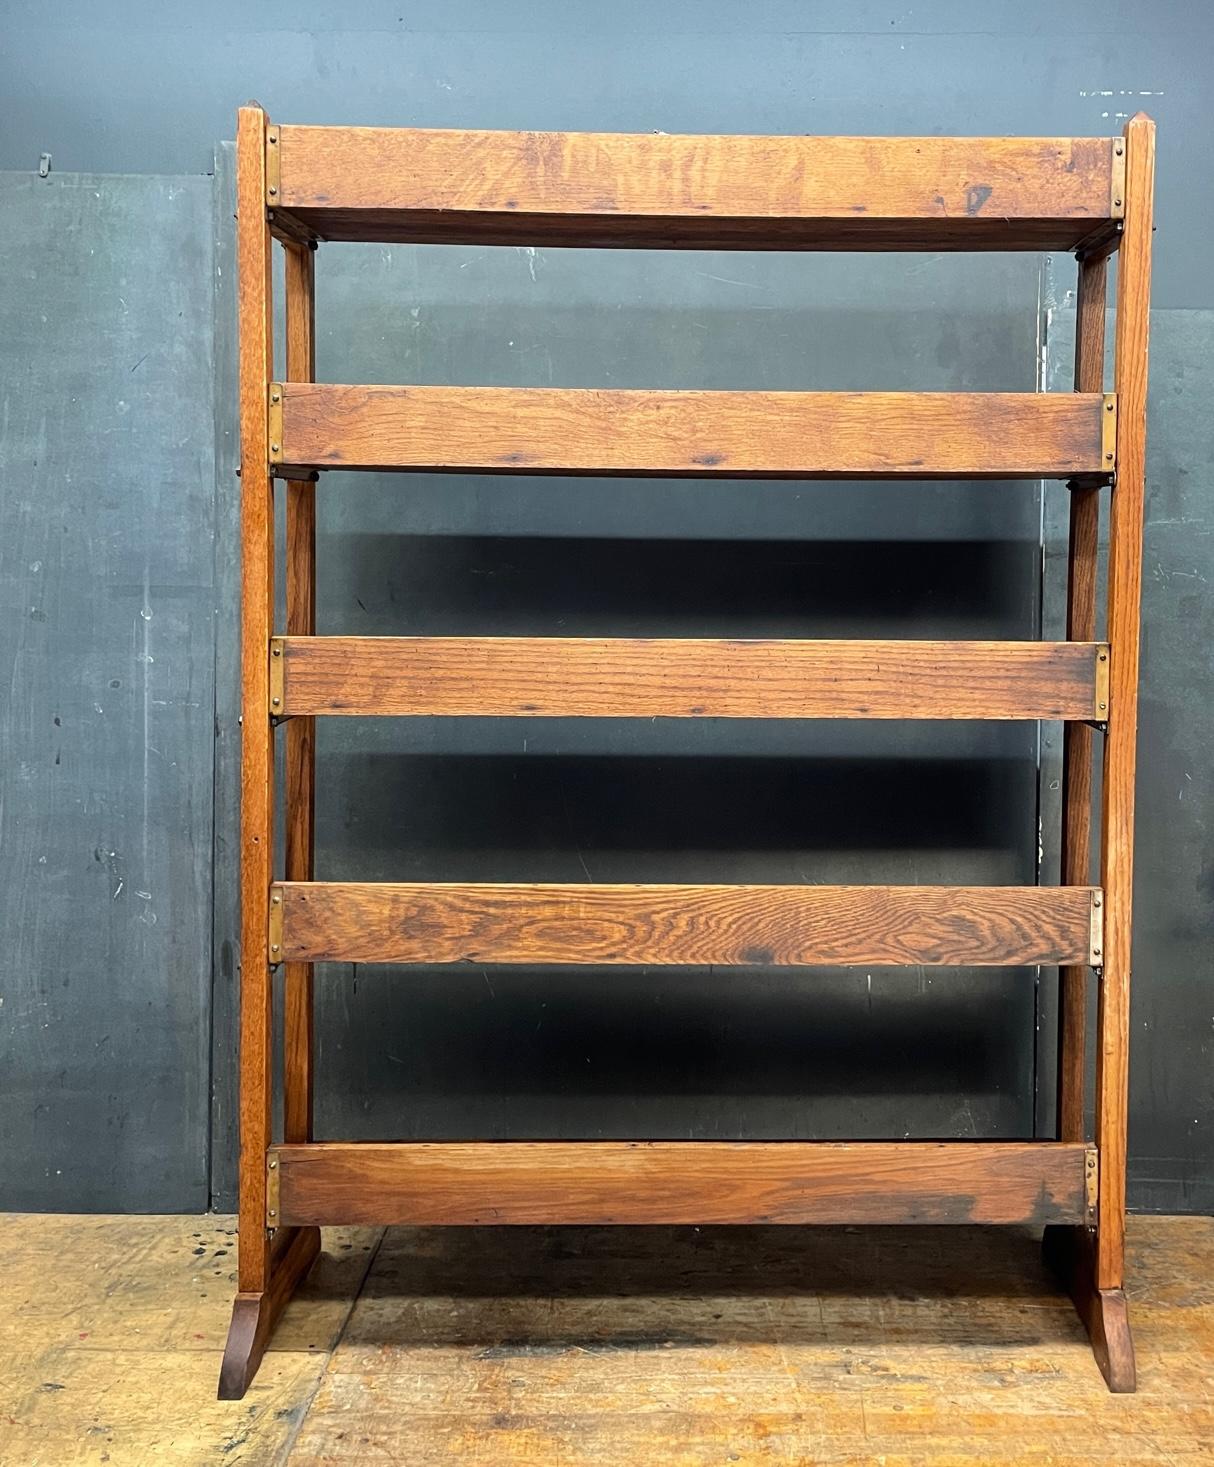 American Mission Bookcase Shelf Bespoke General Store Industrial NYC Retail Display Shelf For Sale